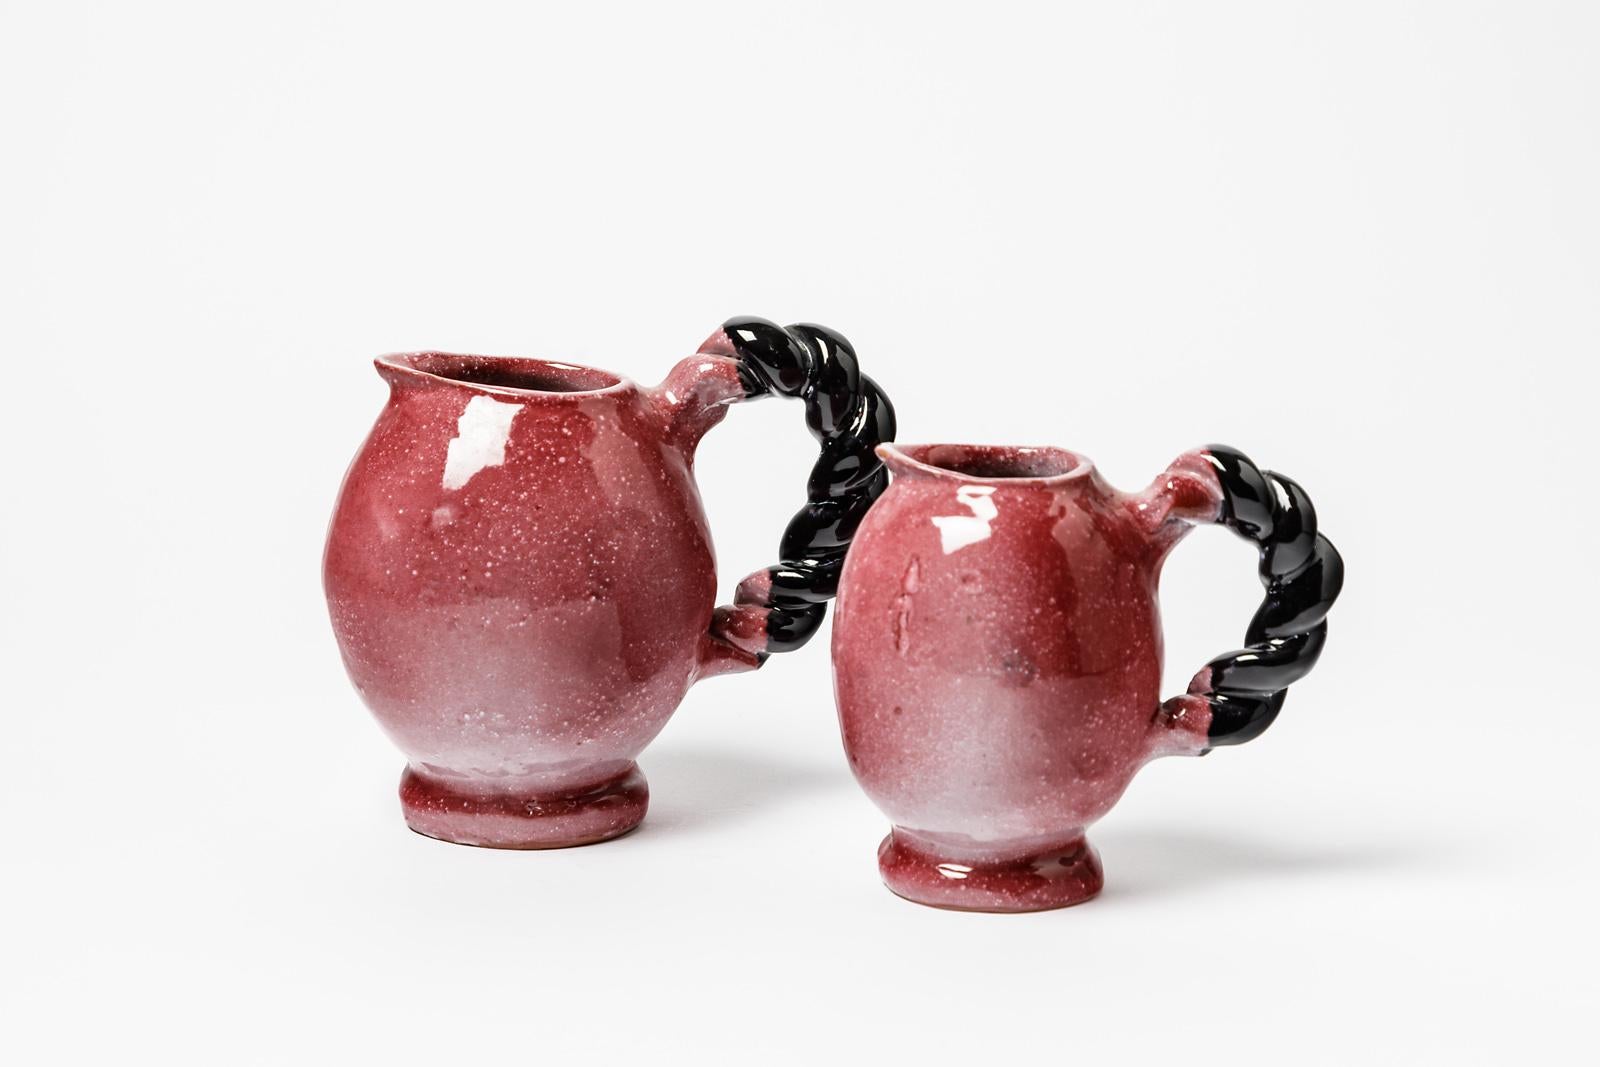 Max Idlas

Set of two ceramic pitchers from XXth mid century design

Elegant red and black ceramic glazes colors

Original good conditions, realised circa 1950

Signed under the base IDLAS

Measures: Height : 16cm Large : 17cm
Height :